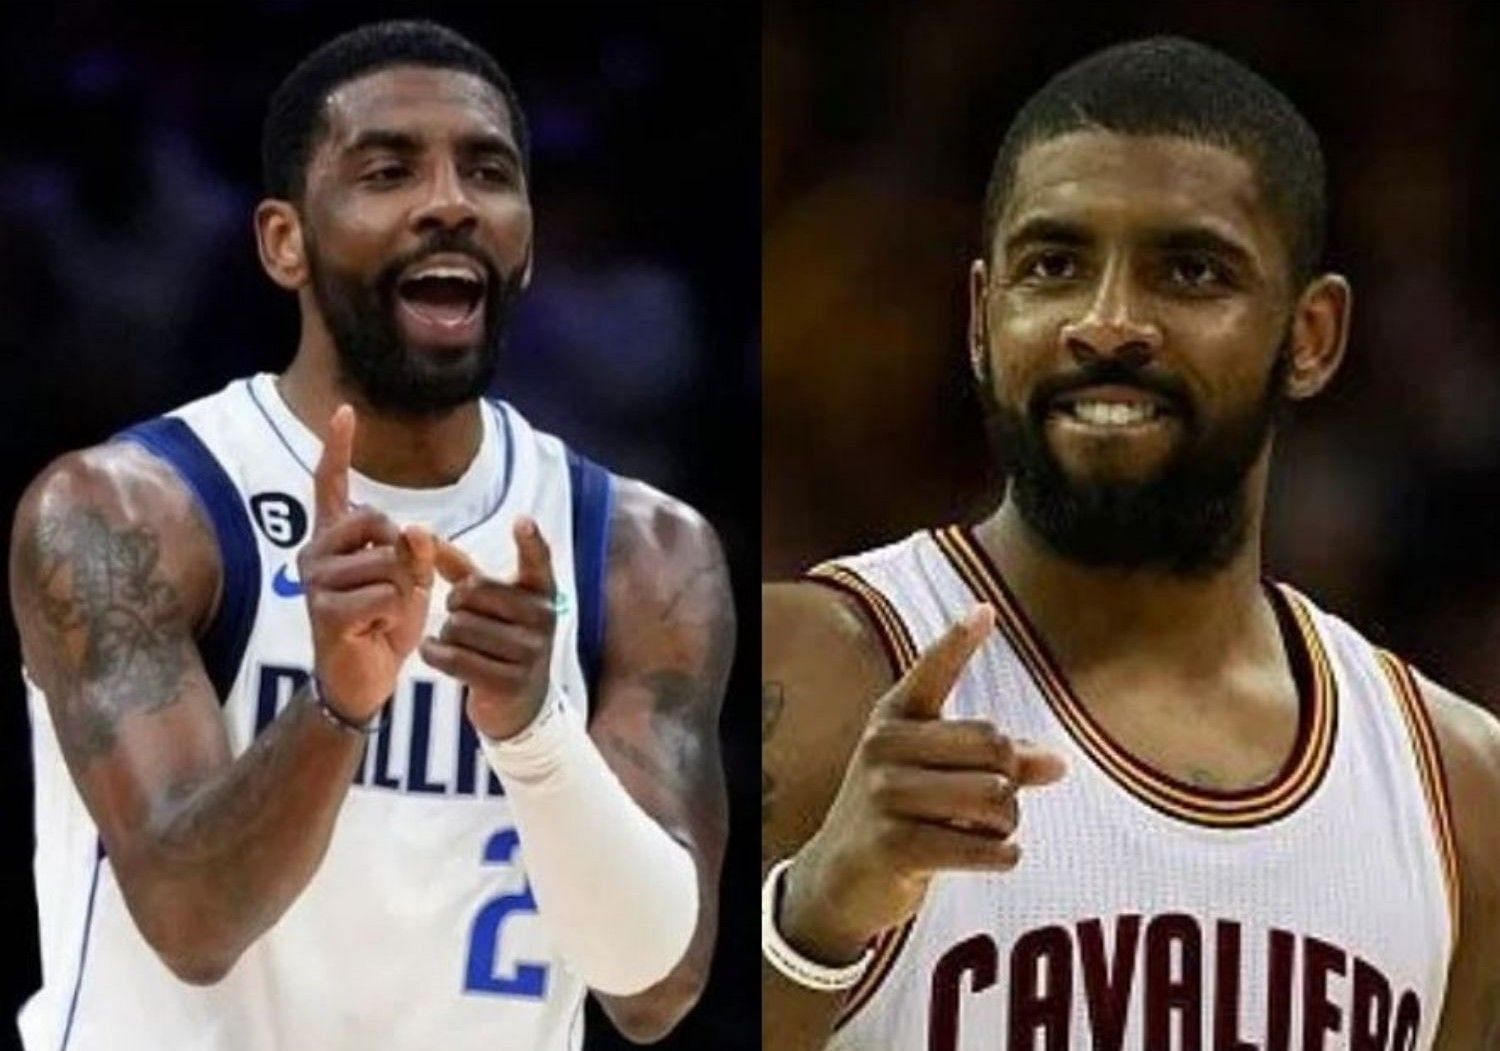 In hindsight, Kyrie Irving said he would have preferred to be drafted by the Dallas Mavericks in 2011 than the Cleveland Cavaliers.